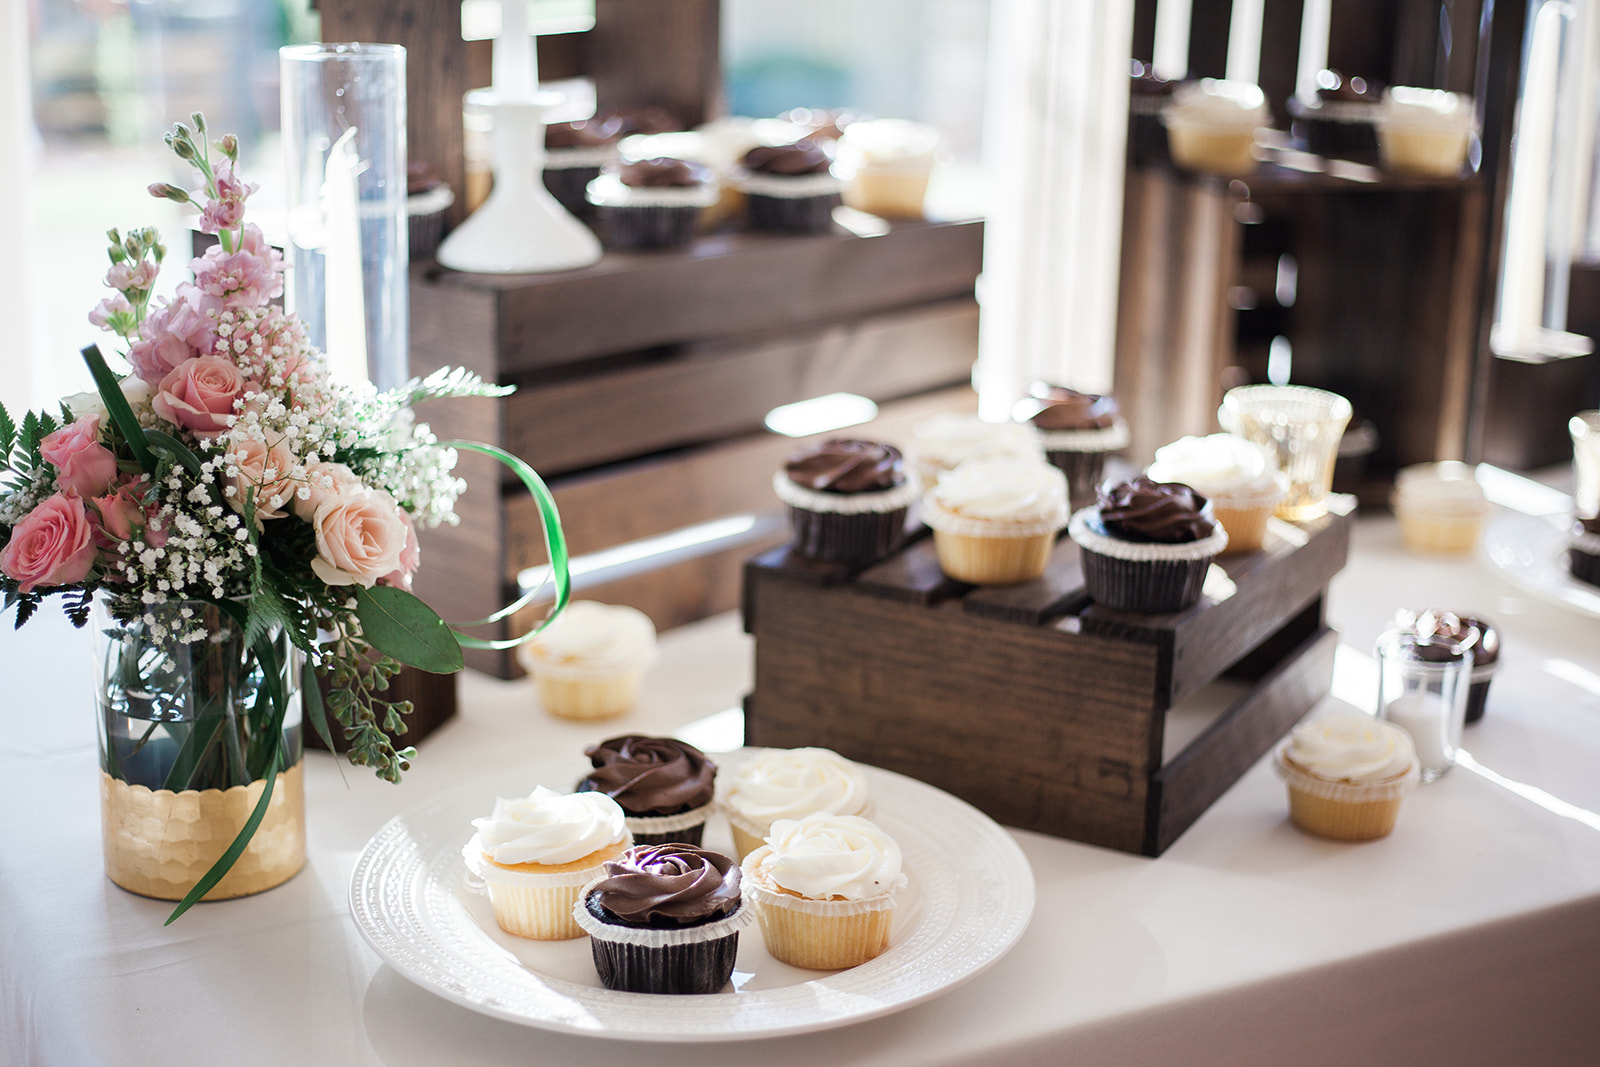 cupcakes on dessert table at reception